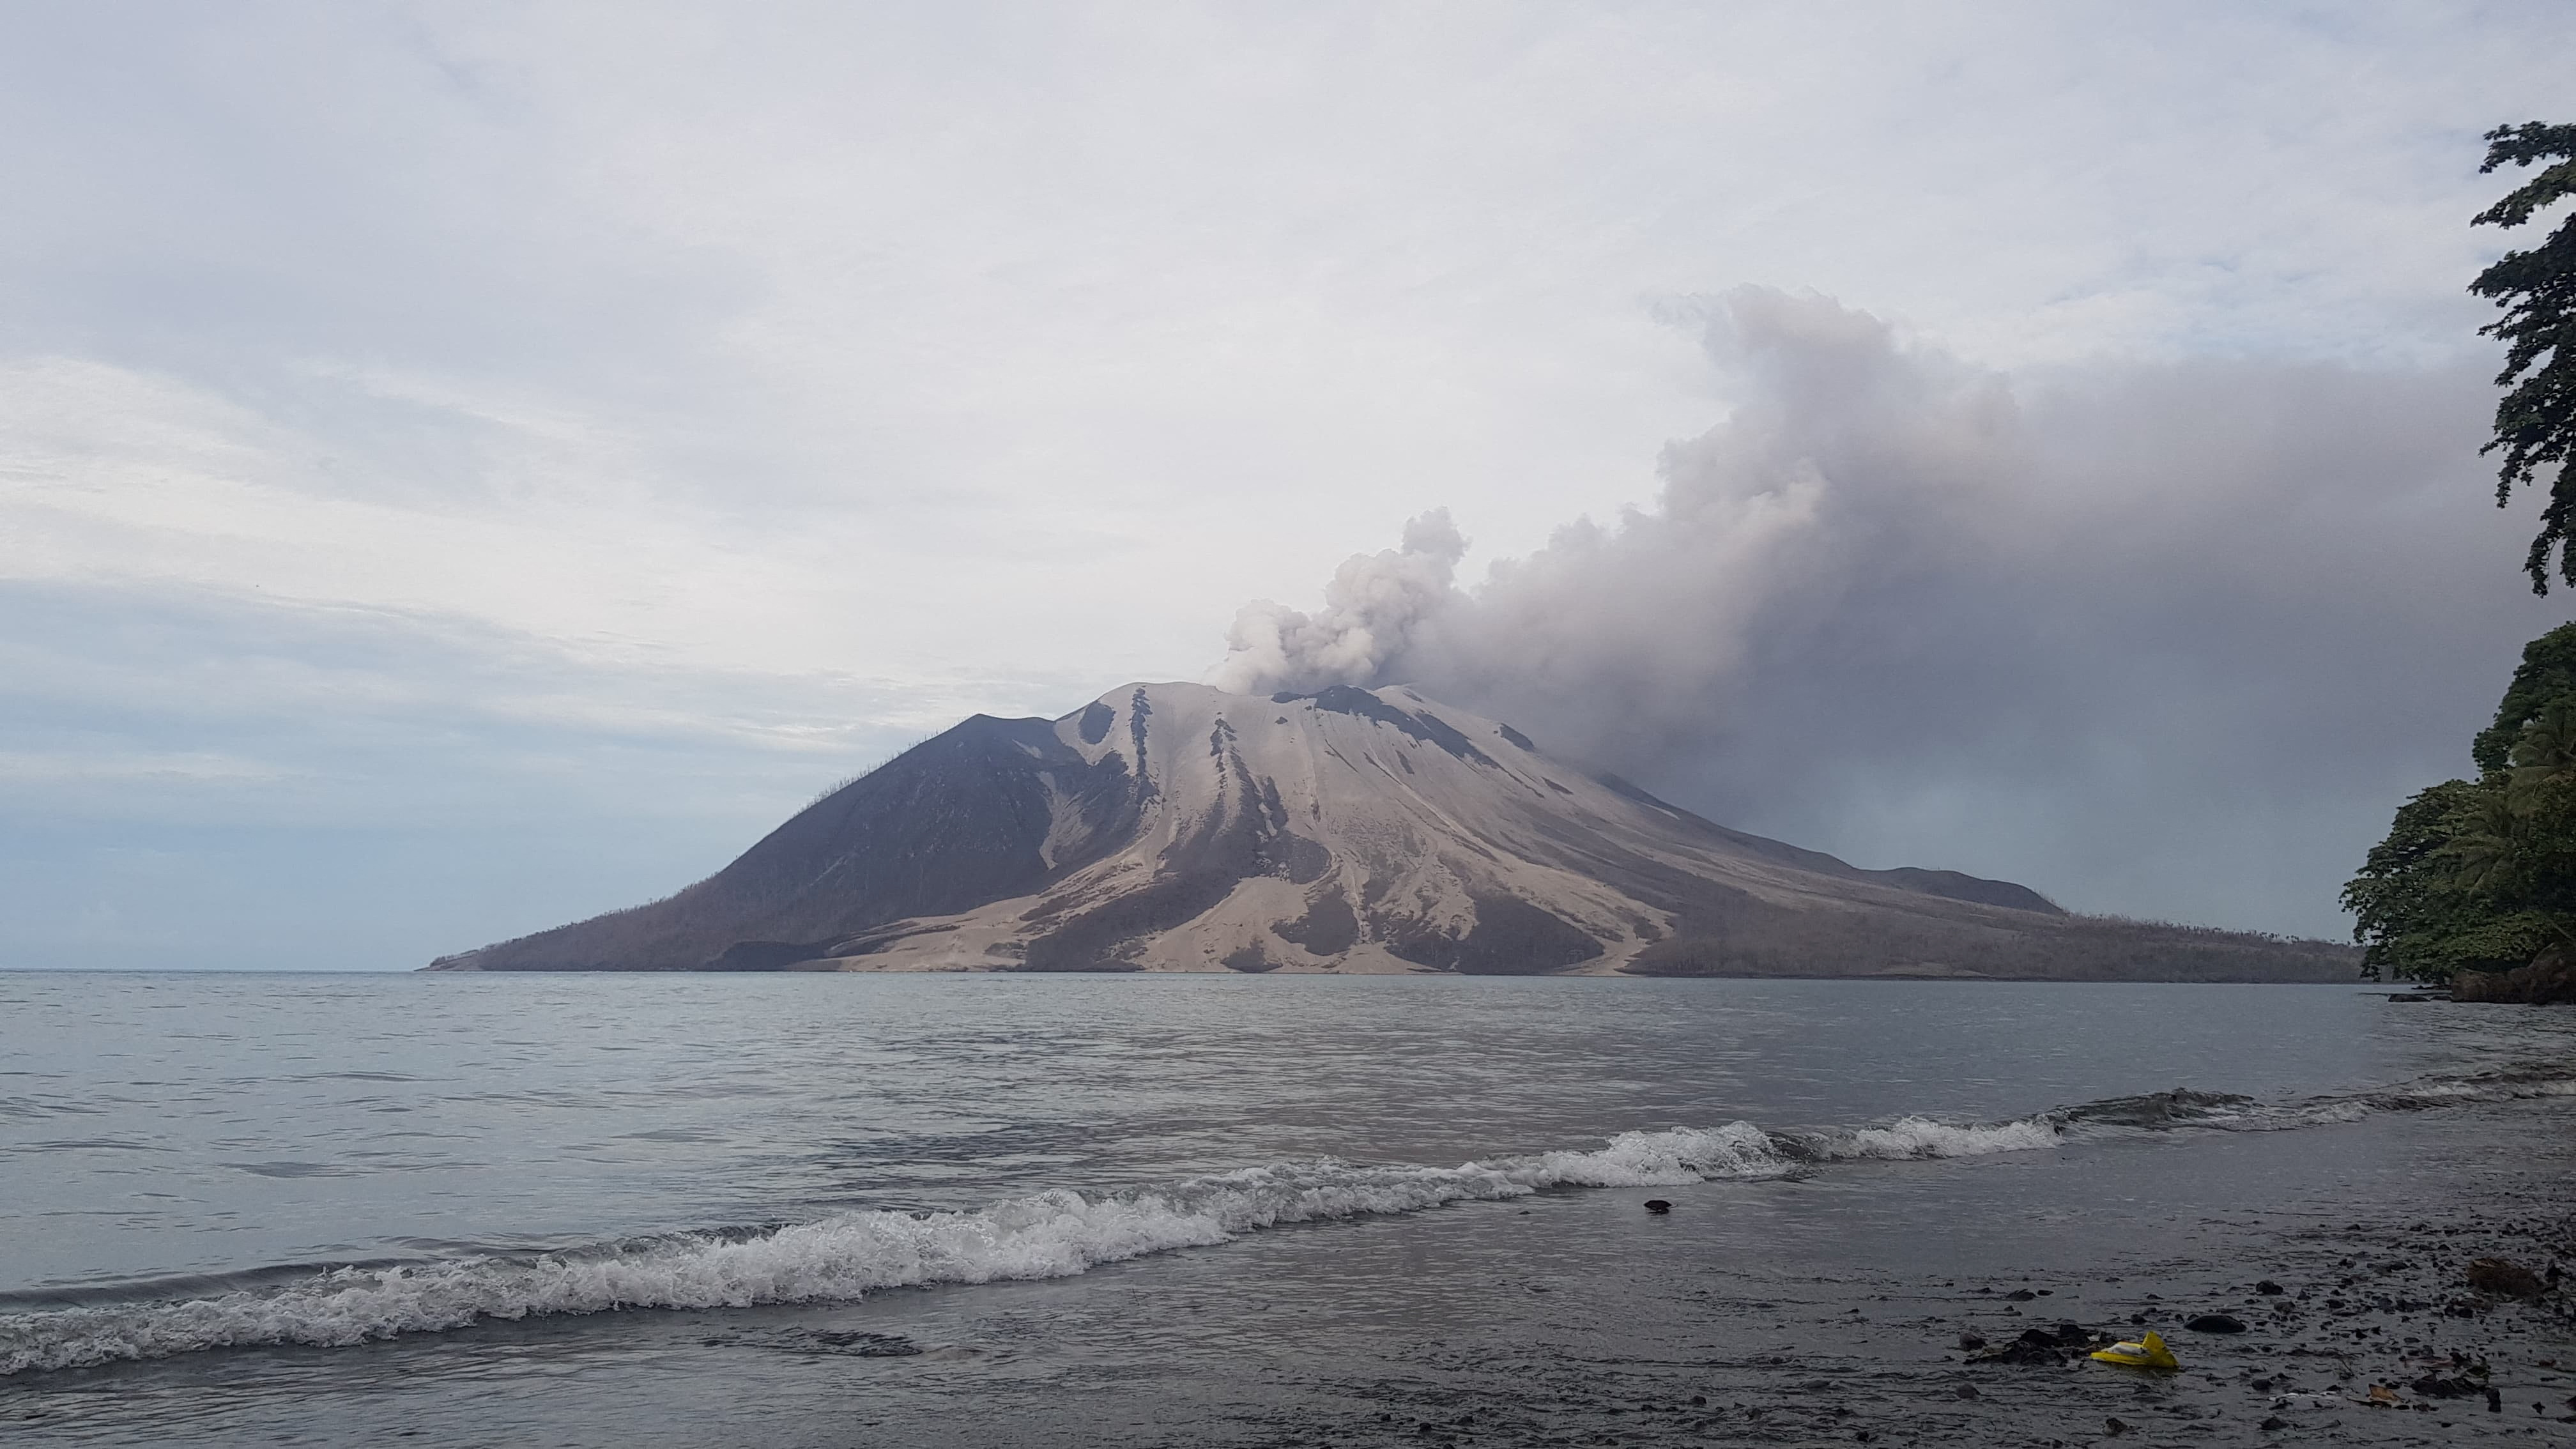 Mount Ruang volcano eruption as seen from Tagulandang in Sitaro, North Sulawesi province